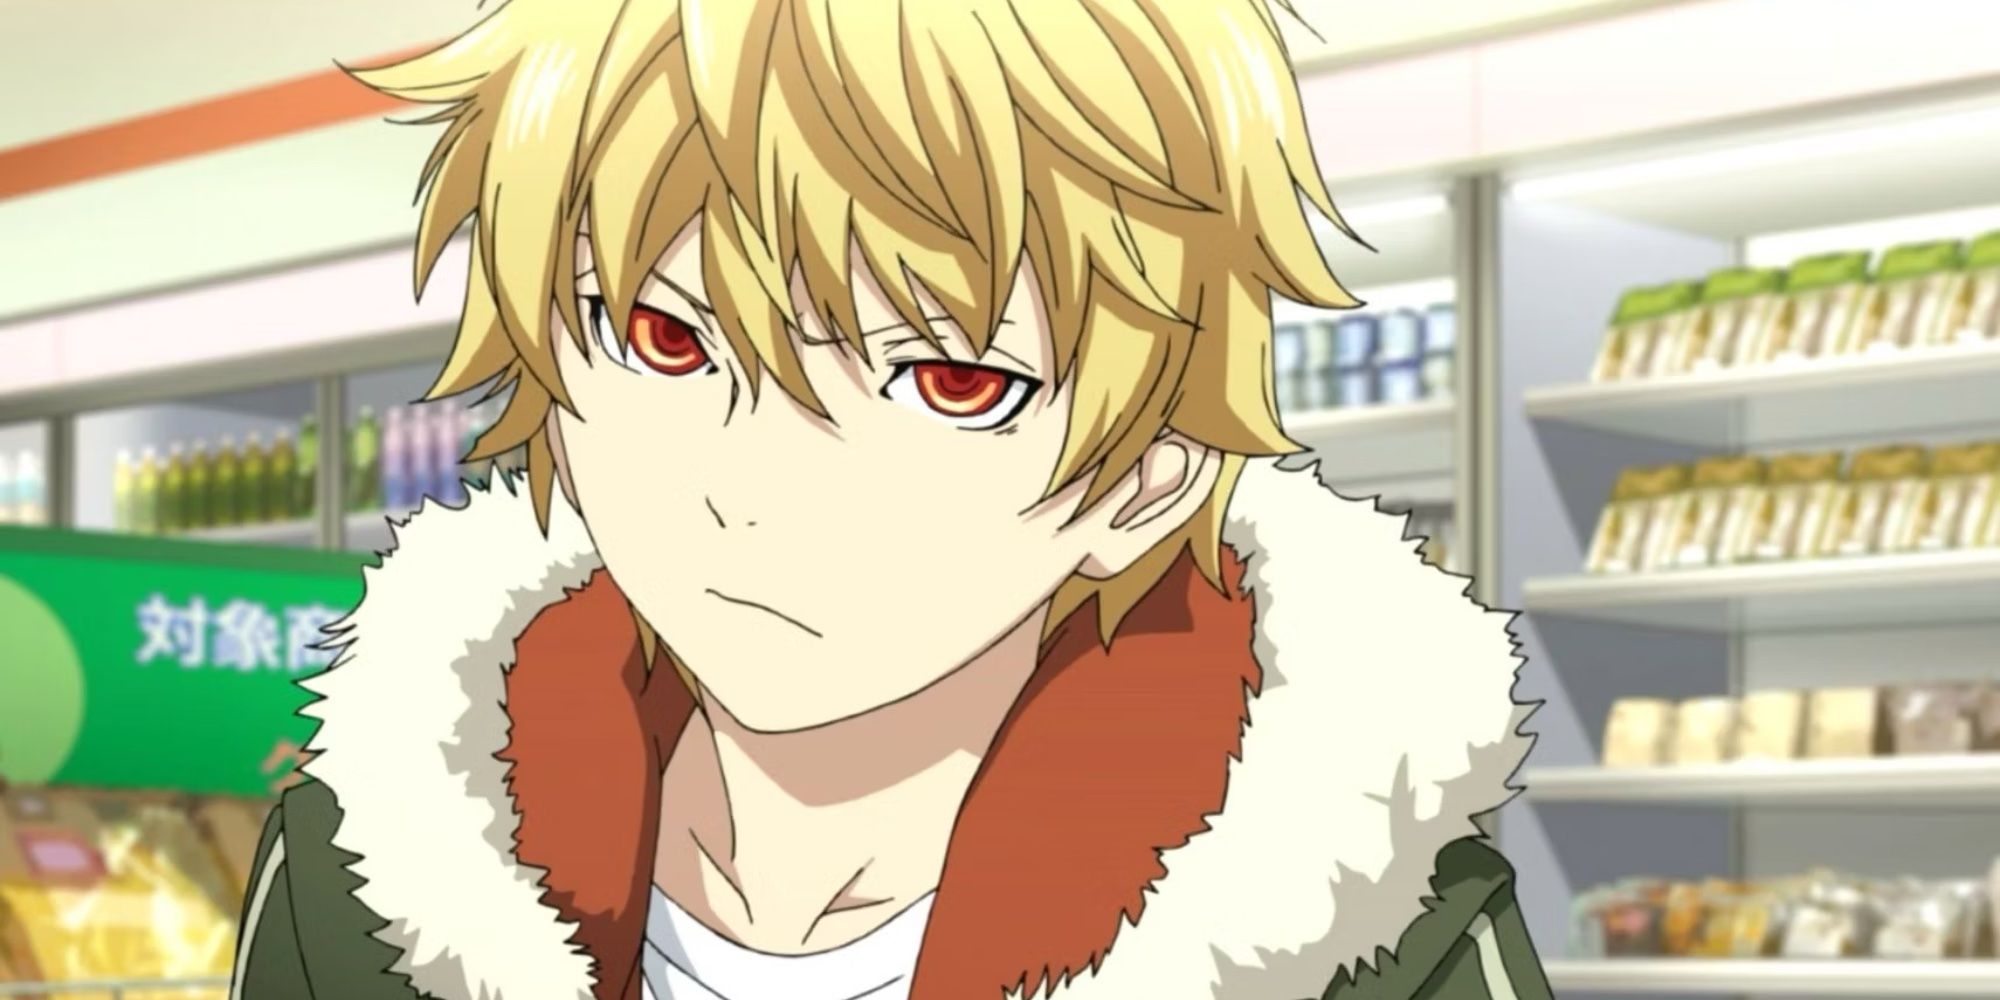 Yukine looking furious while standing inside a convenience store